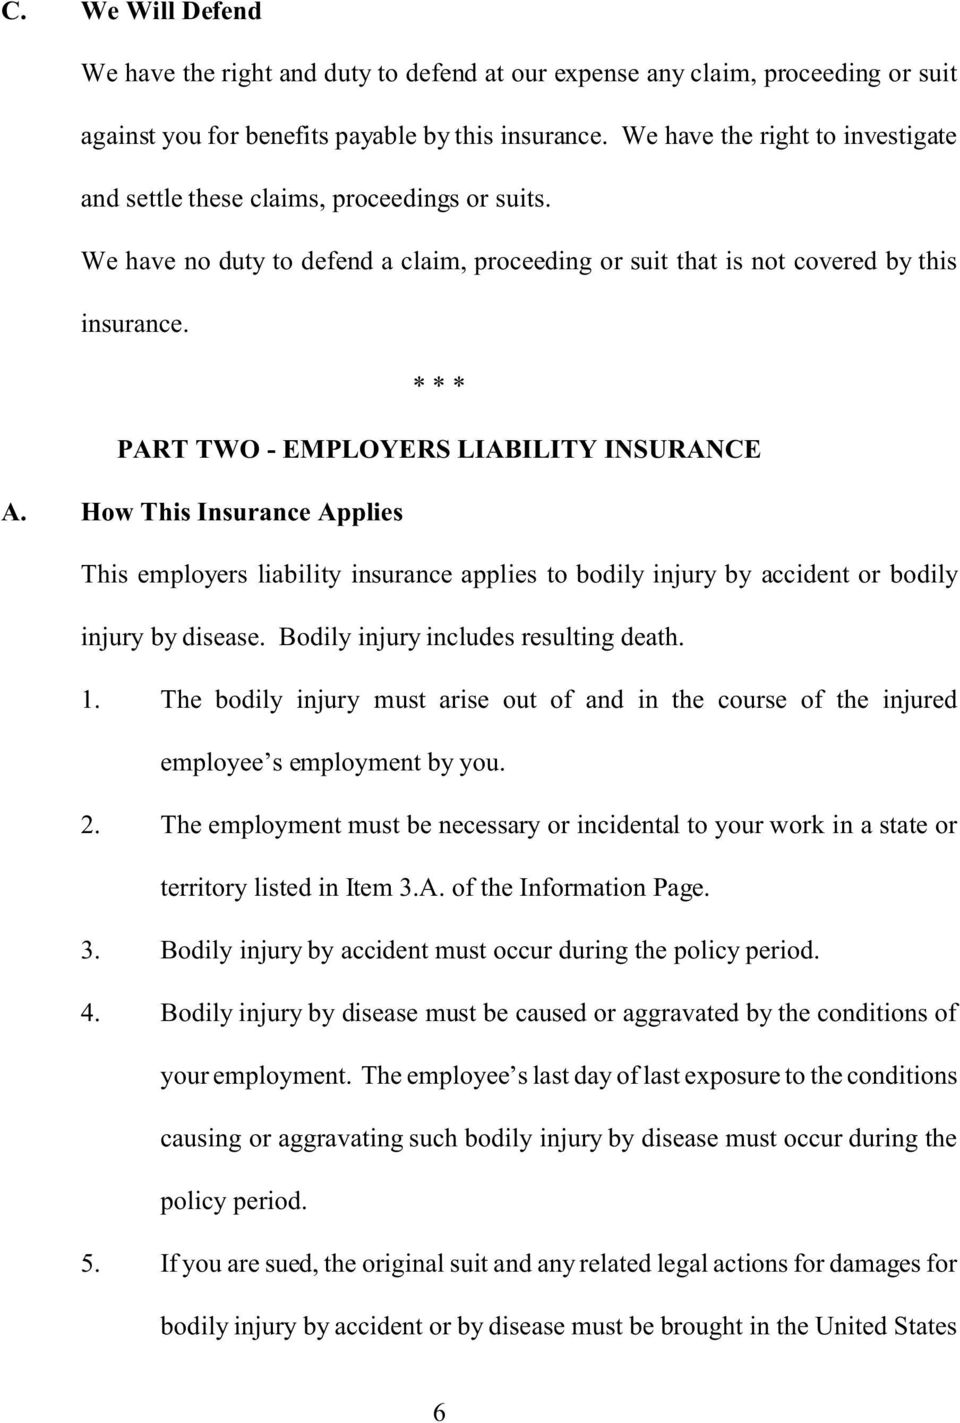 * * * PART TWO - EMPLOYERS LIABILITY INSURANCE A. How This Insurance Applies This employers liability insurance applies to bodily injury by accident or bodily injury by disease.